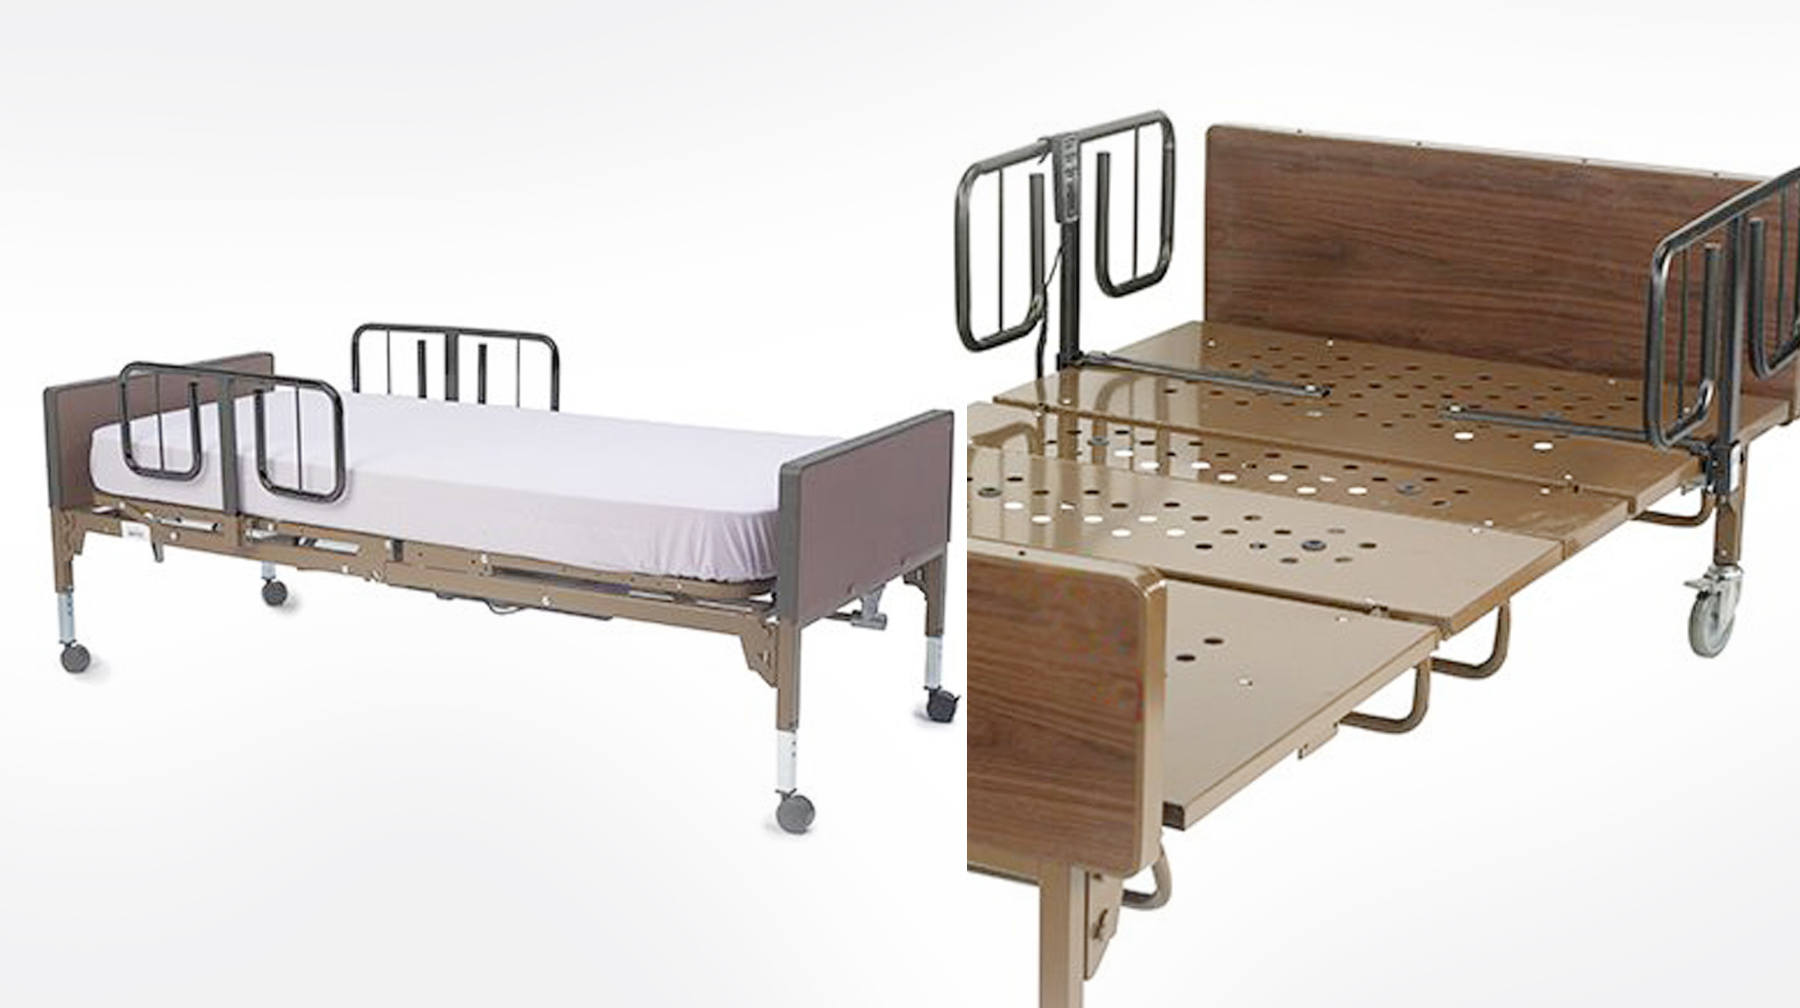 Why Do You Pick a Full Electric Bariatric Hospital Bed?